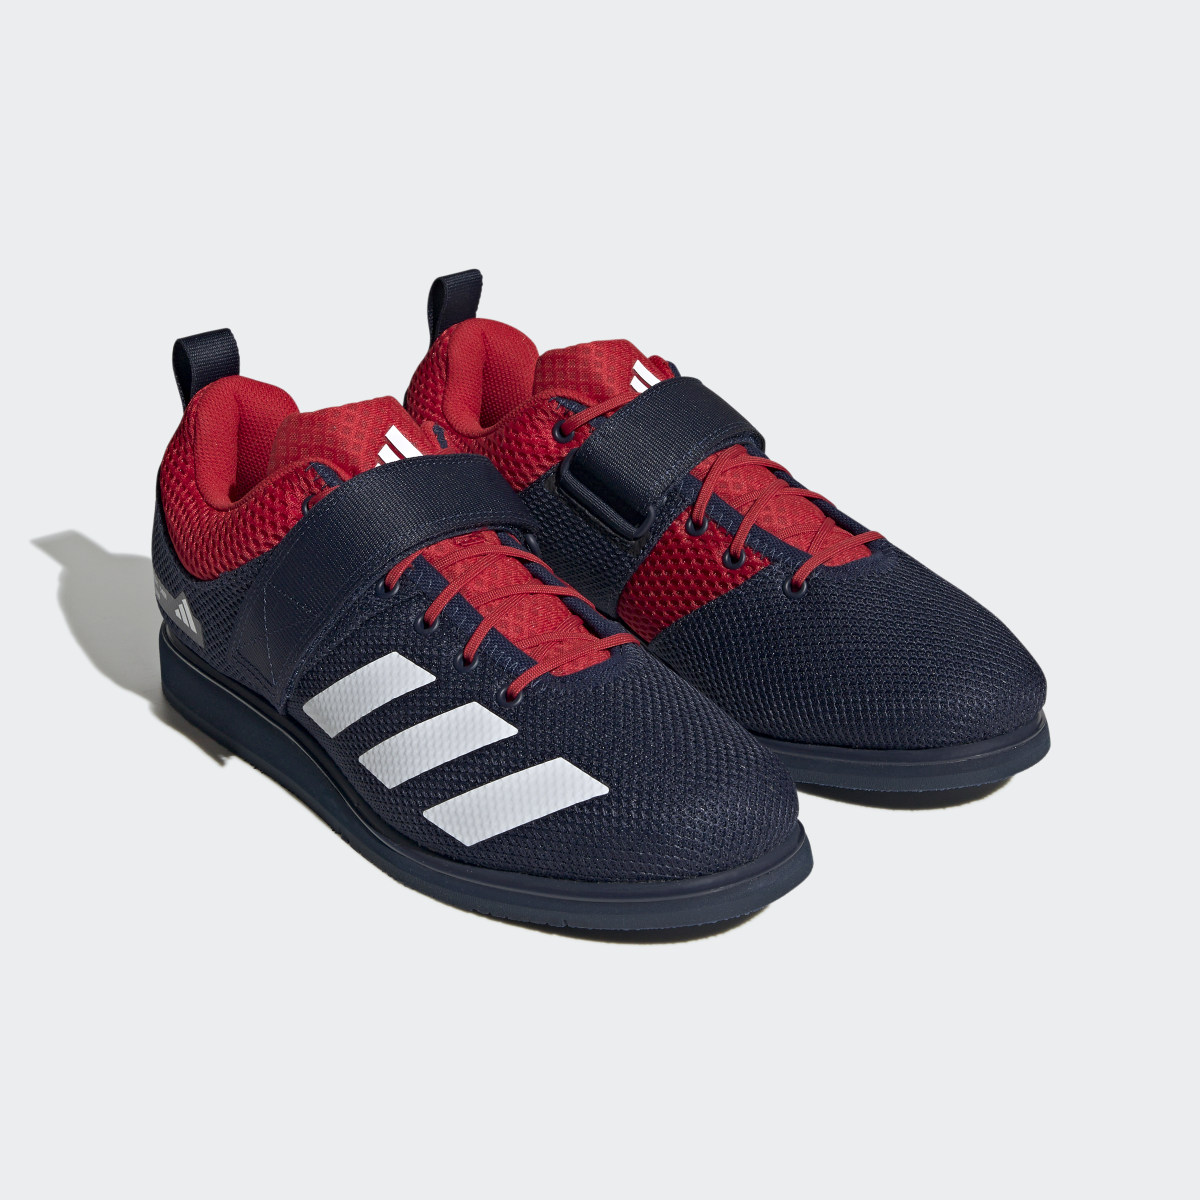 Adidas Powerlift 5 Weightlifting Shoes. 5